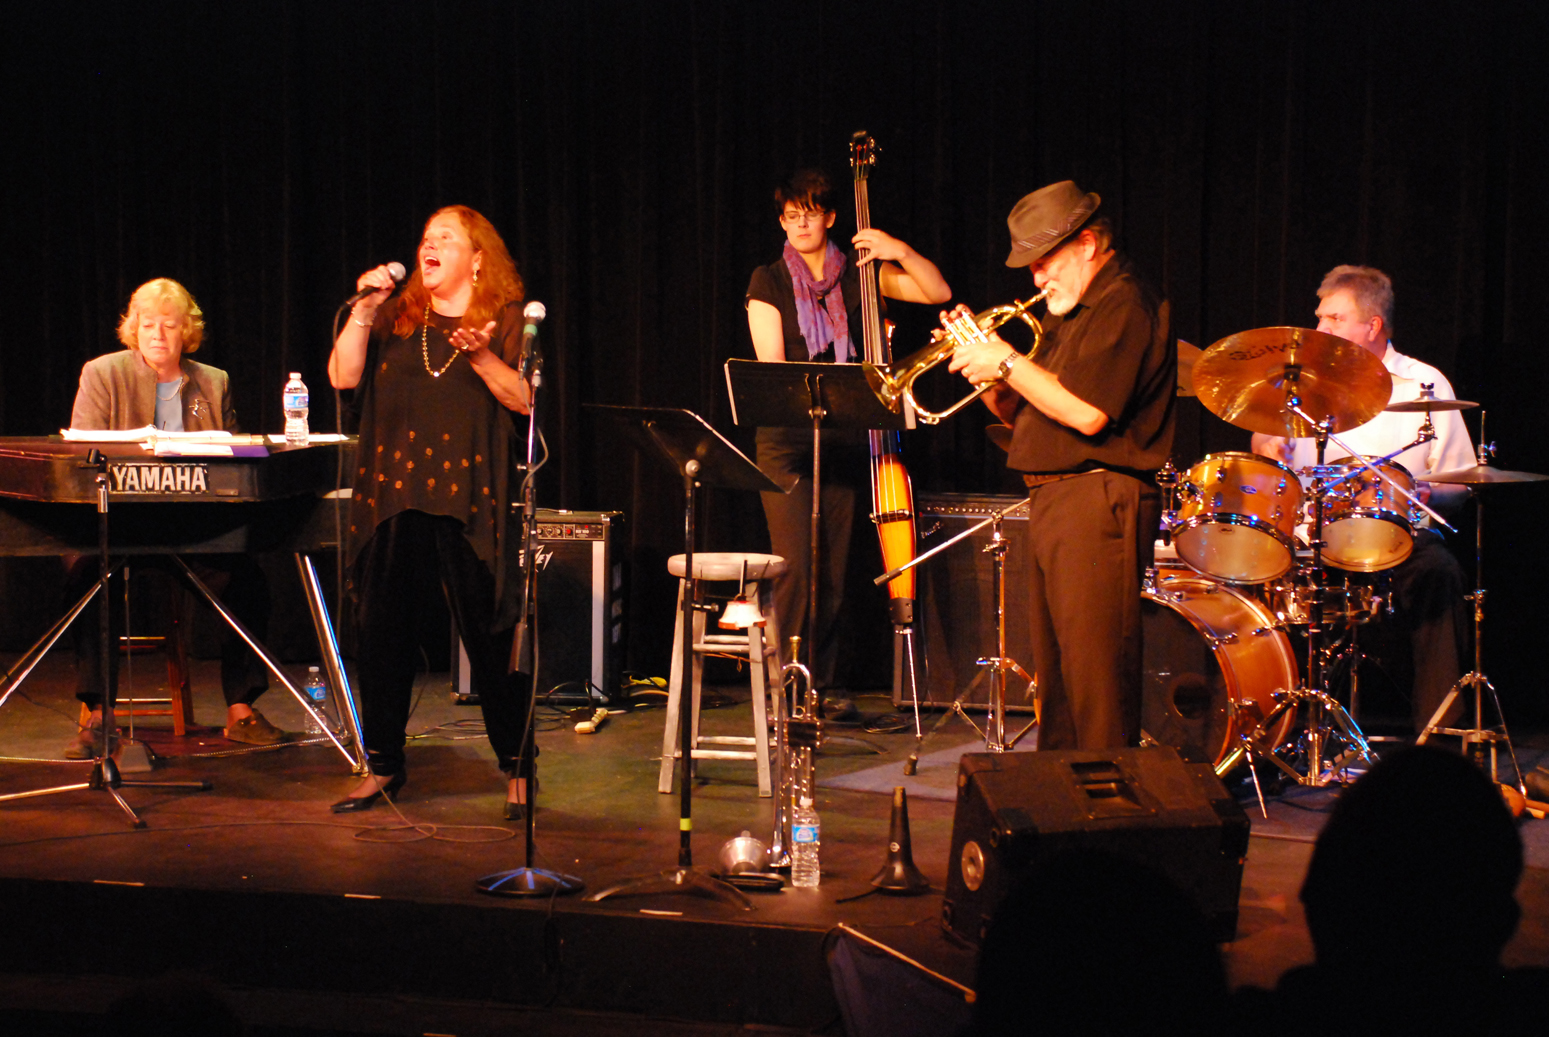 Outrageous Jazz performs in 2012 at Pier One Theatre. From left to right are Karen Strid-Chadwick, piano; Brenda Vulgamore Hune, vocals; Heidi Herbert-Lovern, bass; Dale Curtis, trumpet; and Curtis Bates, drums. Bates is not playing this year, with Cameron Cartland playing drums.  -Photo provided